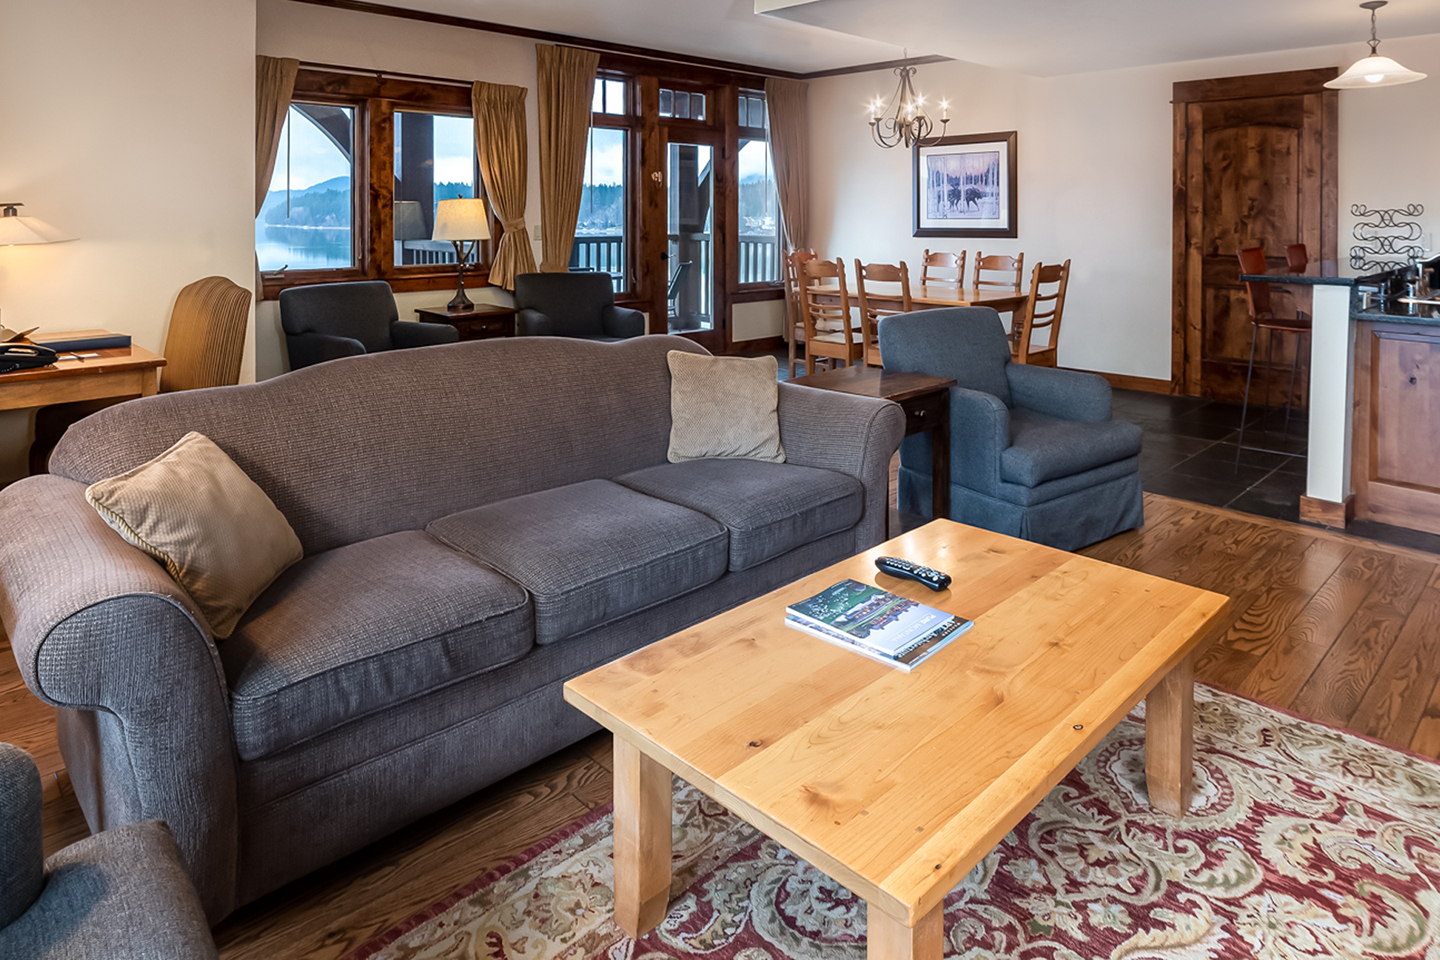 This Lakefront Loft Suite offers spectacular views of Whitefish Lake along with ample space for everyone! – Michael Klippert